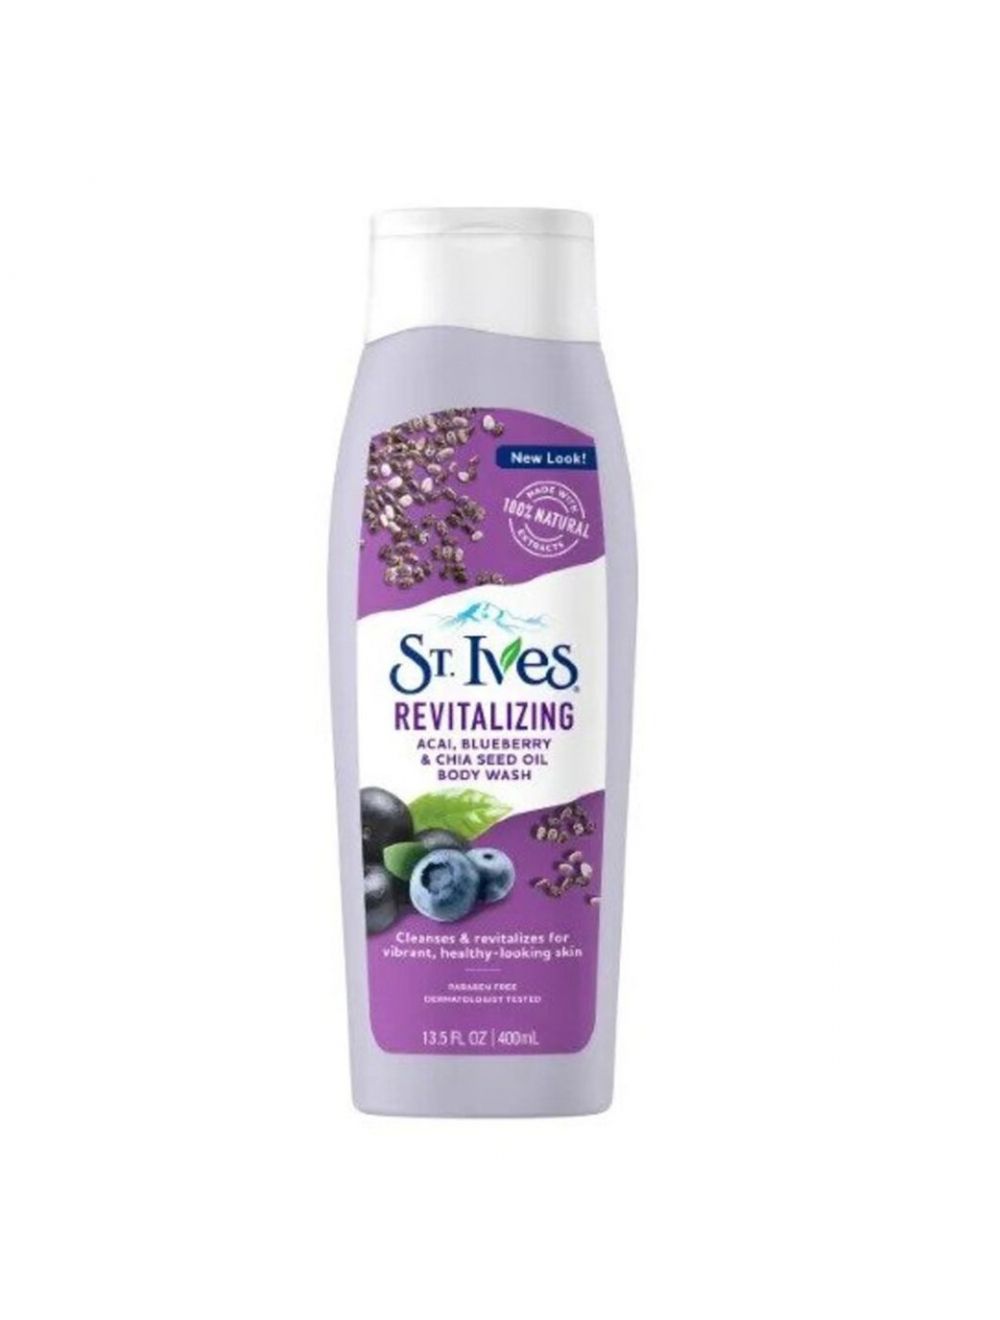 St. Ives Revitalizing Acai Blueberry & Chia Seed Oil Body Wash (400ml)